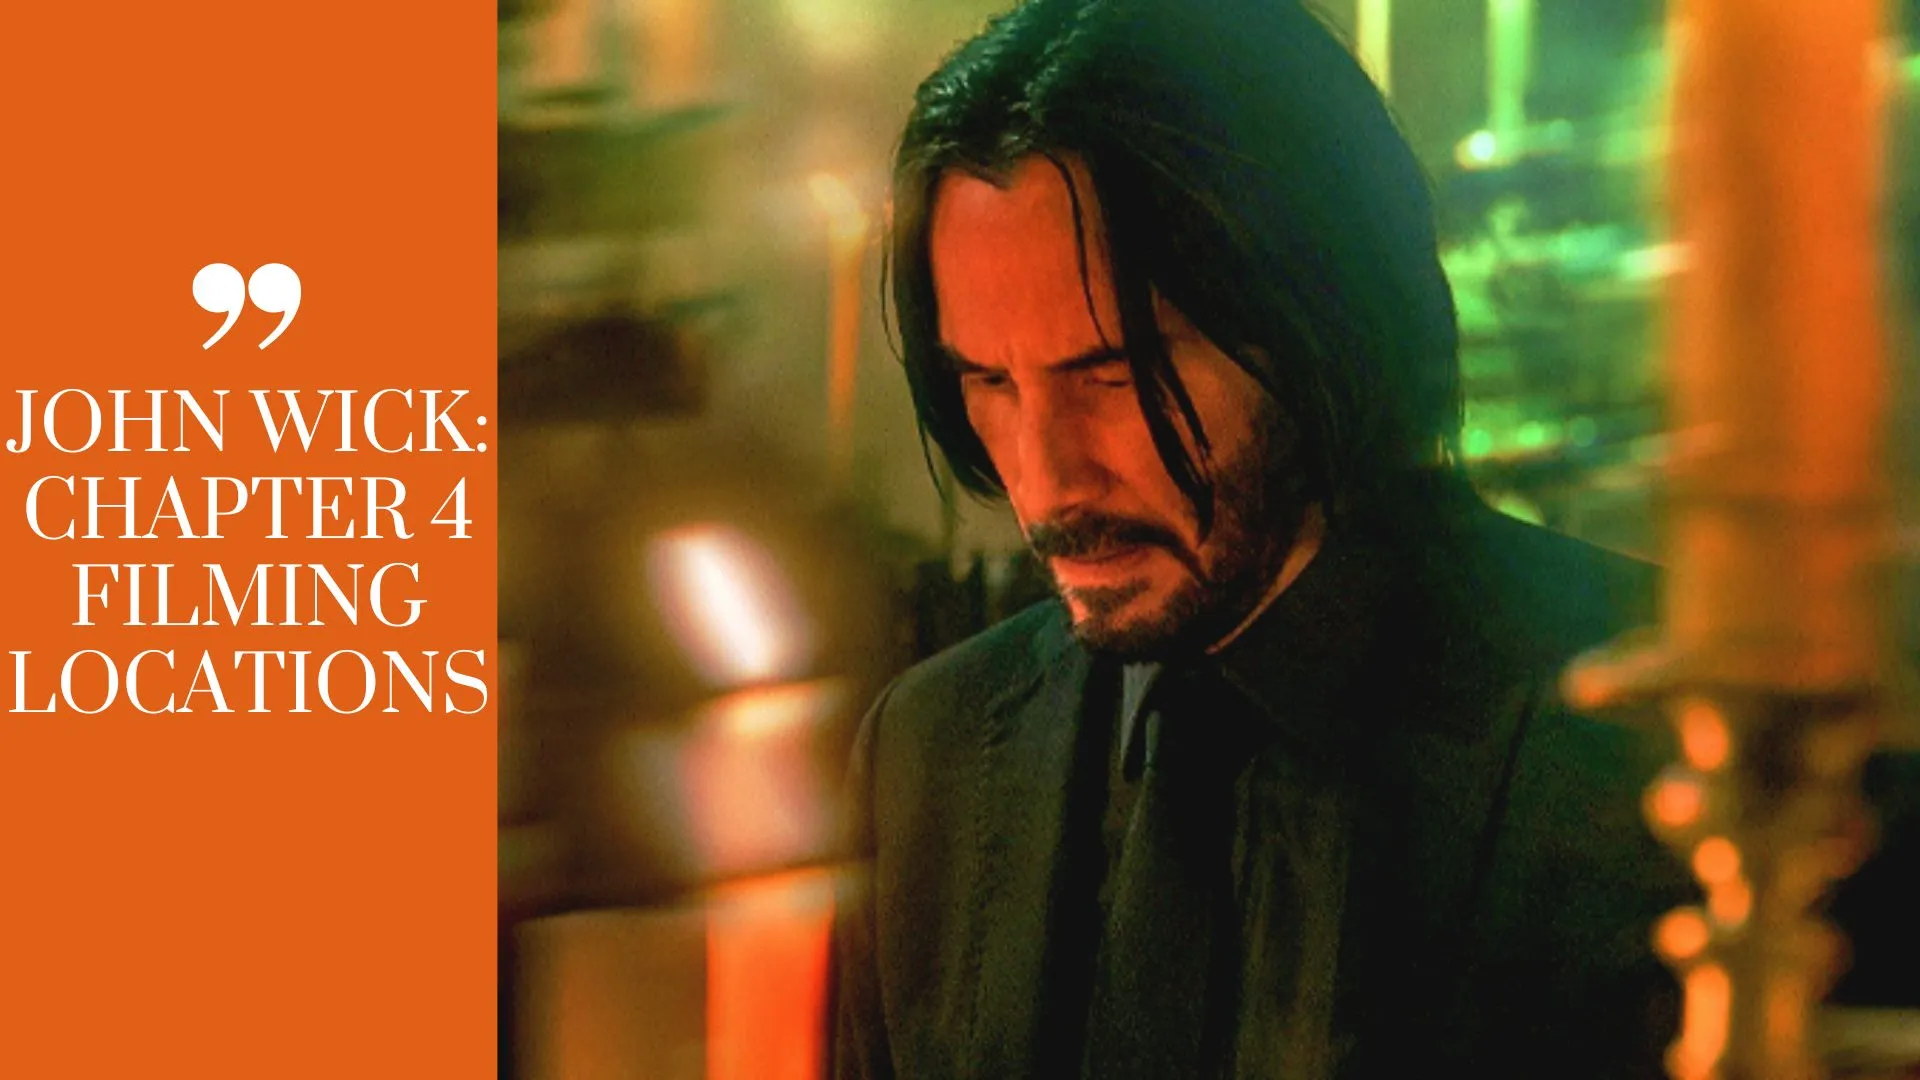 John Wick_ Chapter 4 Filming Locations (Image credit_ rottentomatoes)